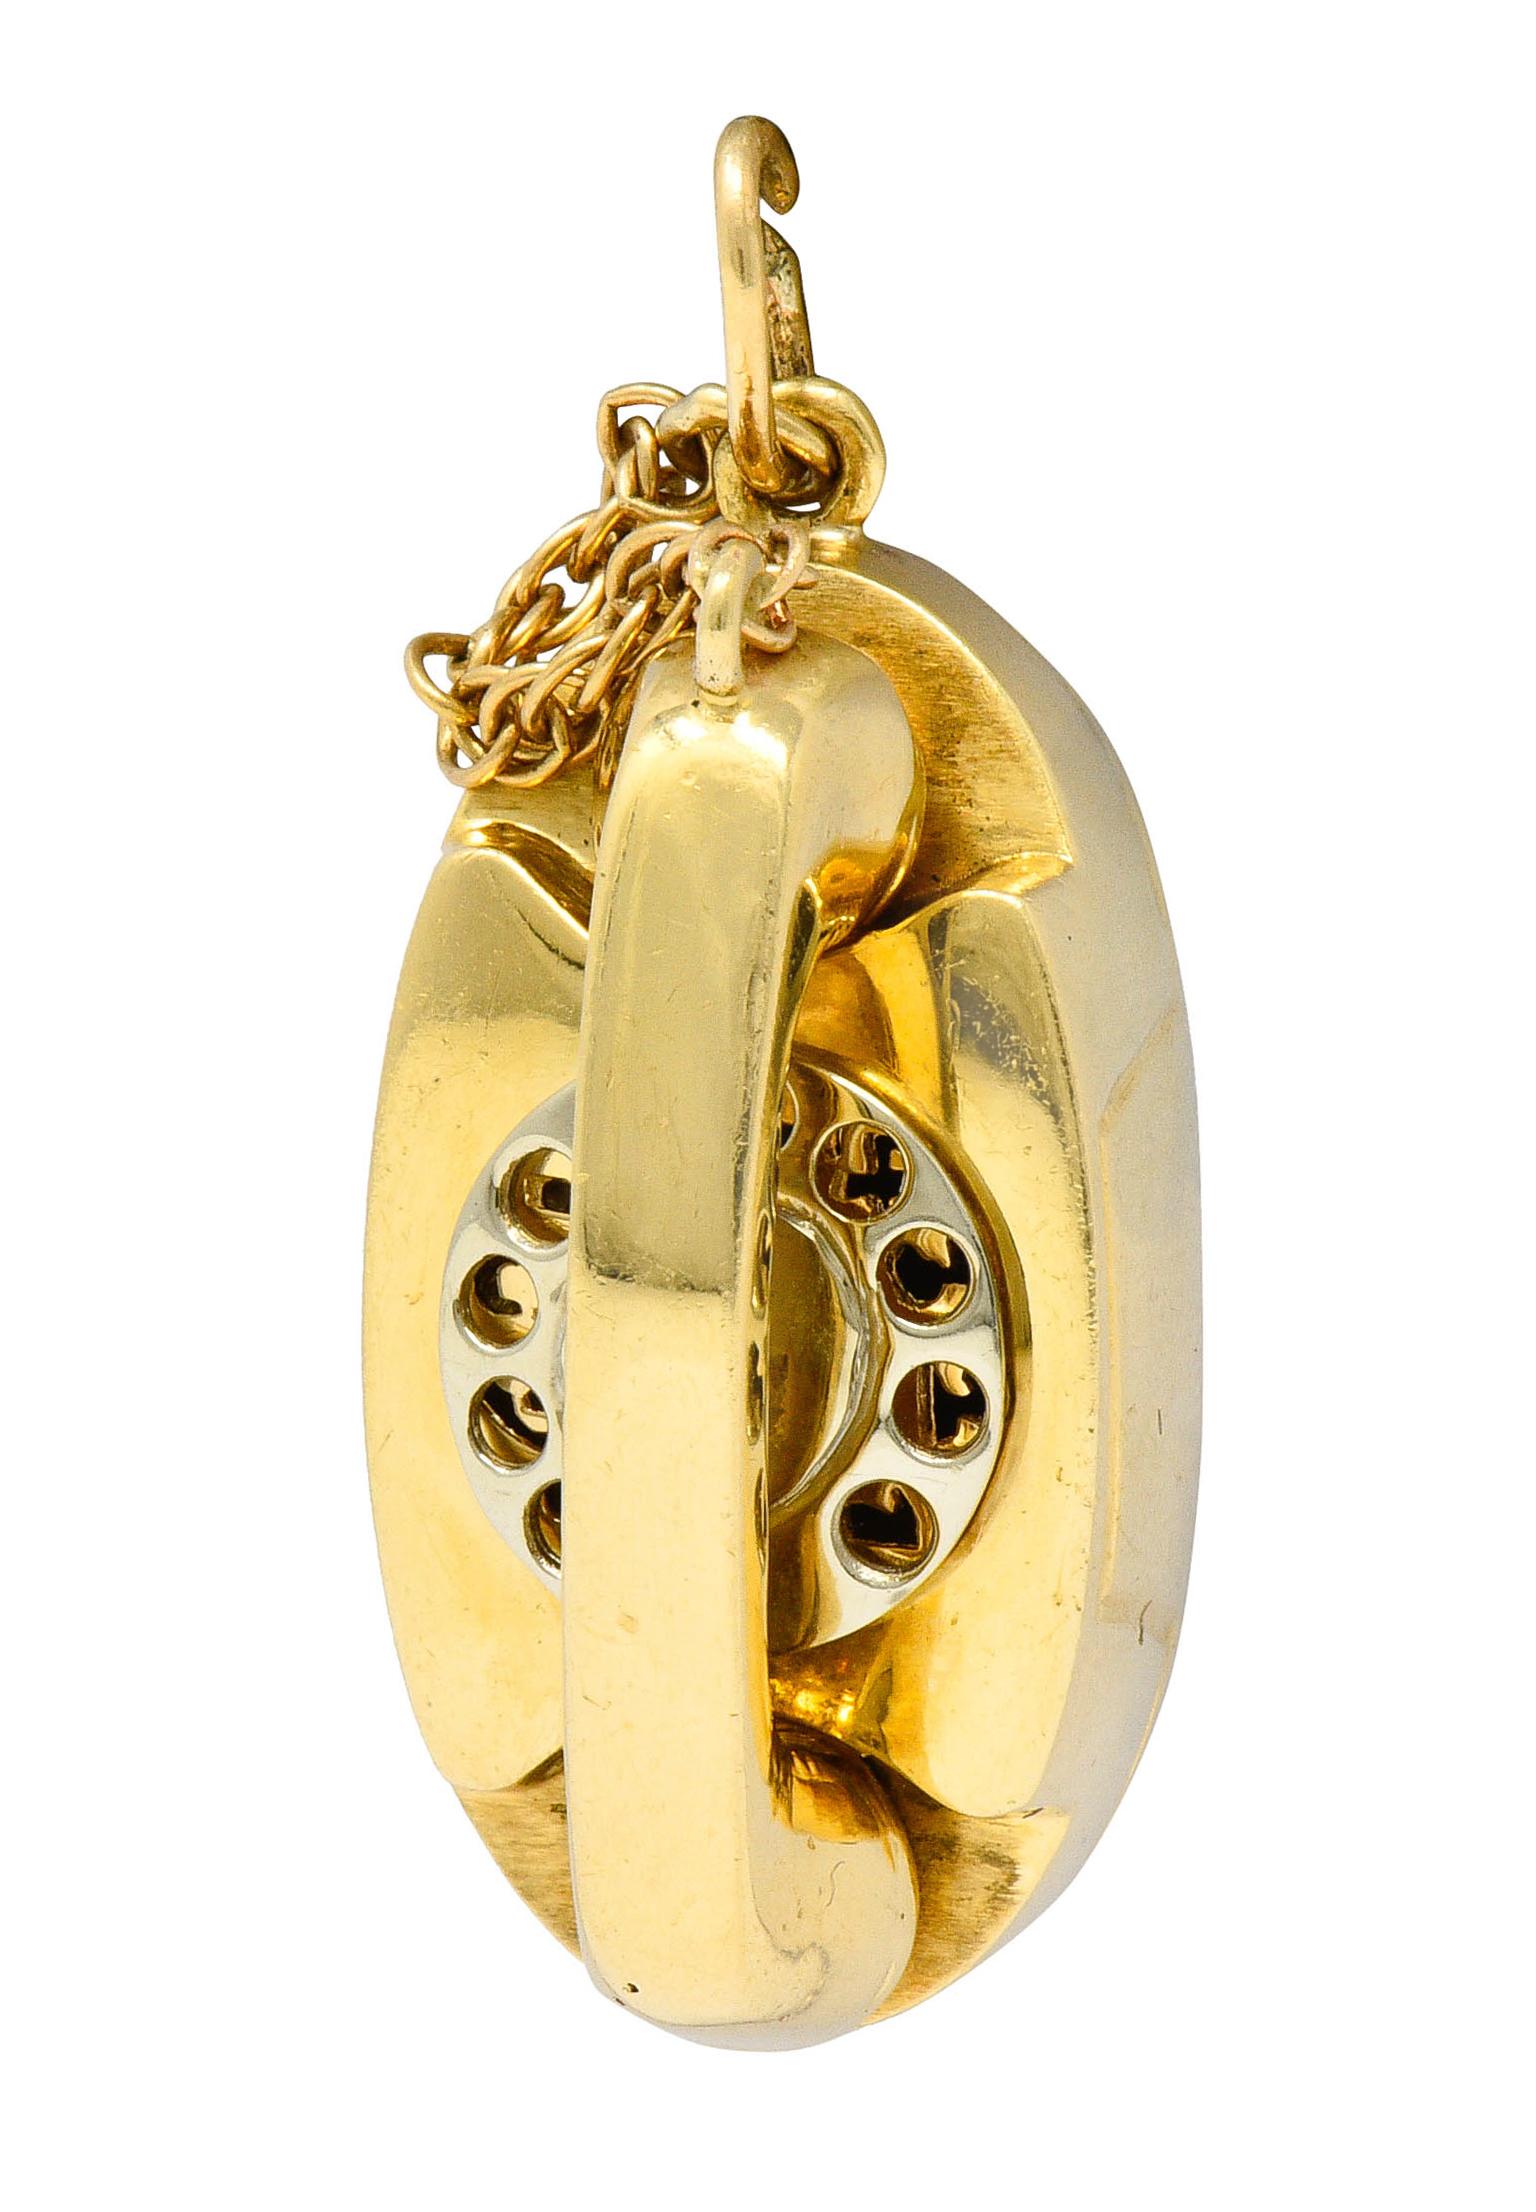 Substantial charm is designed as a vintage telephone accented by a cable chain cord

Pierced and numbered white gold rotary dial that lights up when bottom of the charm is pressed

Fully signed Litacharm Inc.

Stamped 14K for 14 karat gold

Circa: